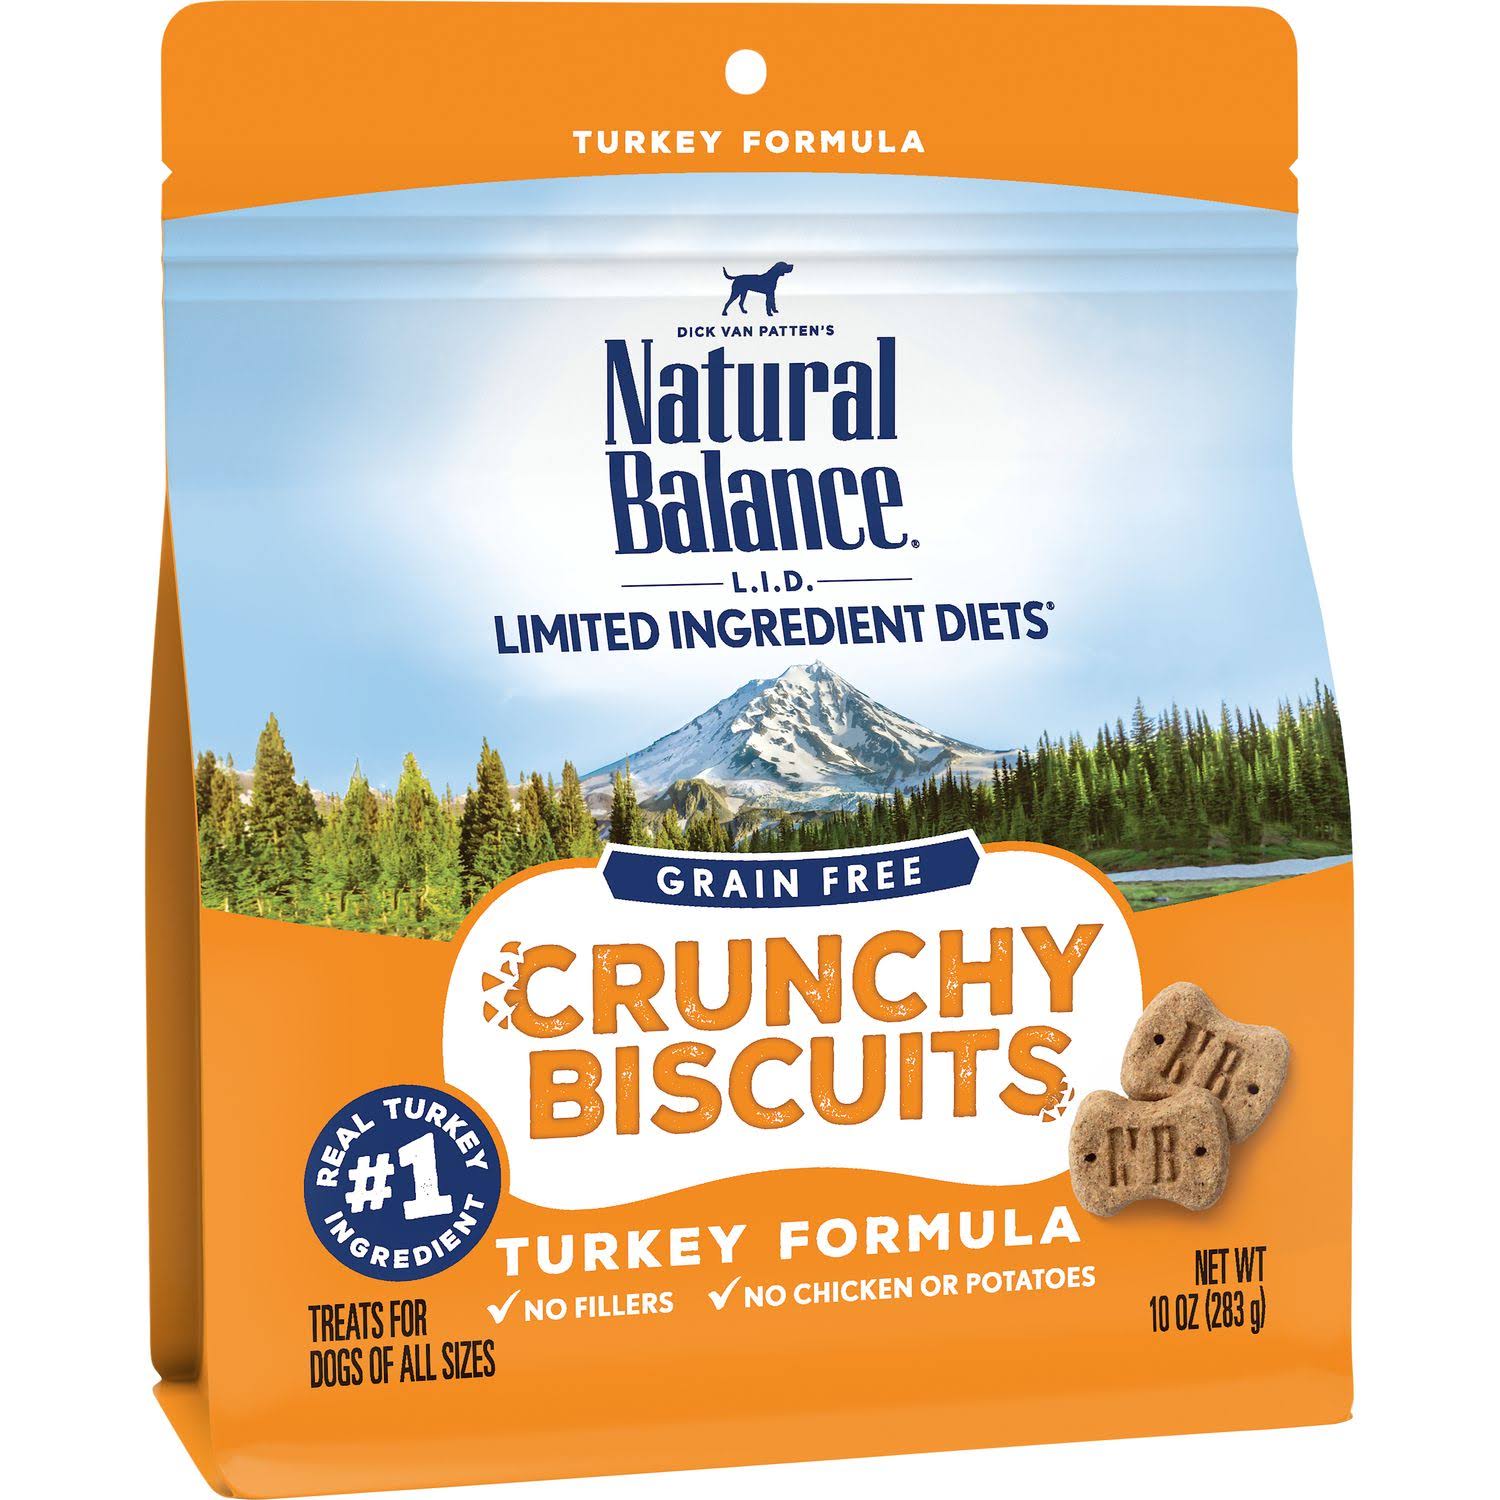 Natural Balance Treat for Dogs, Grain Free, Crunchy Biscuits, Turkey Formula - 10 oz